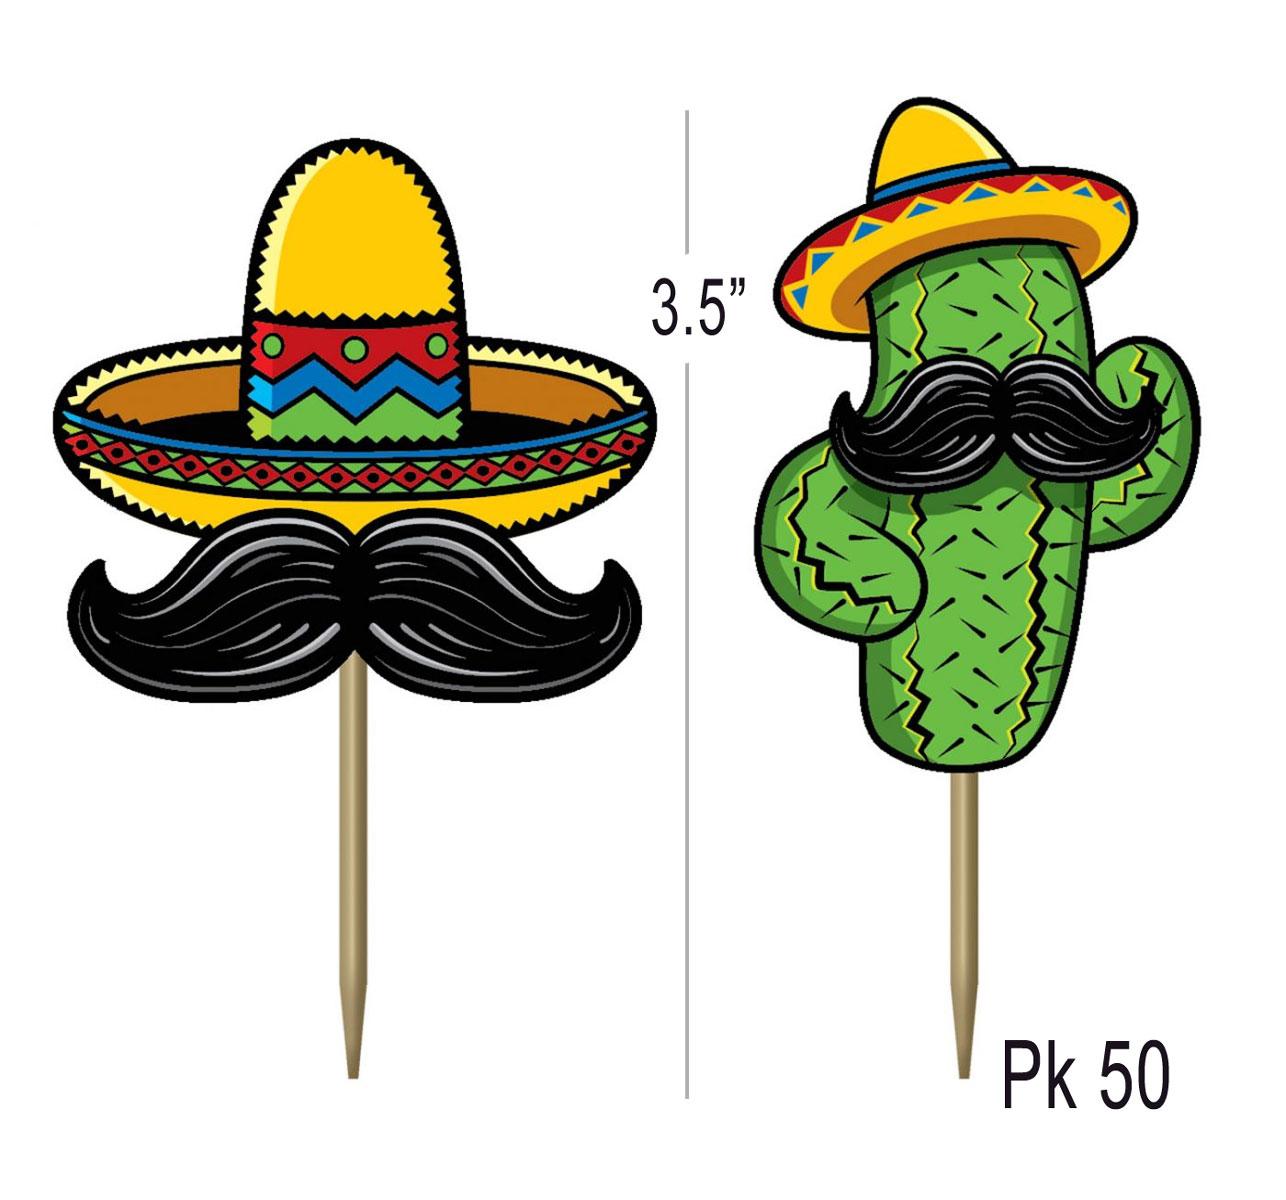 Colourful Mexican Fiesta party picks or Sandwich flags pk50 pcs by Beistle 60661 available here at Karnival Costumes online party shop